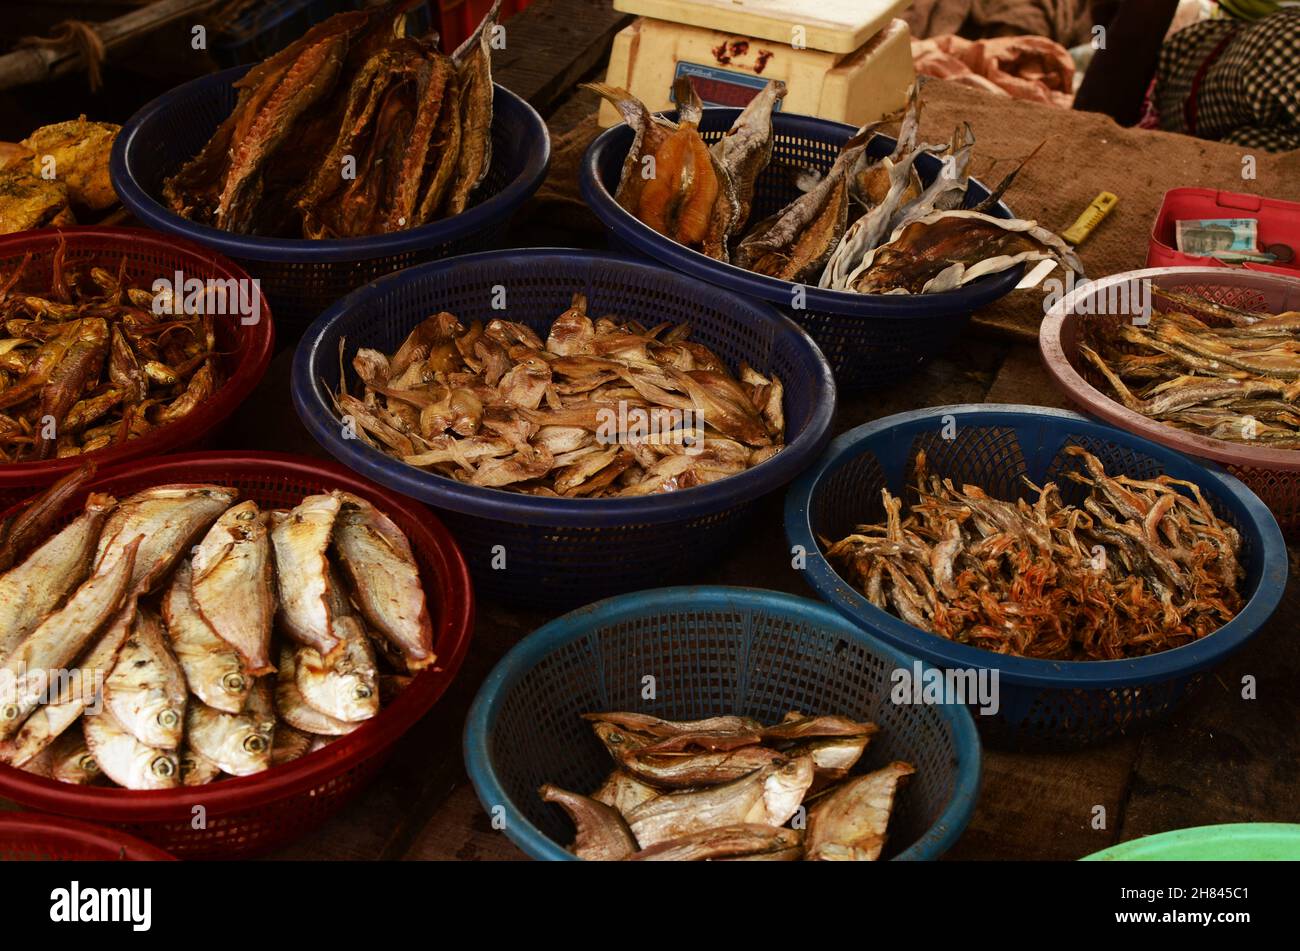 Fresh dried fish are kept for sale Stock Photo